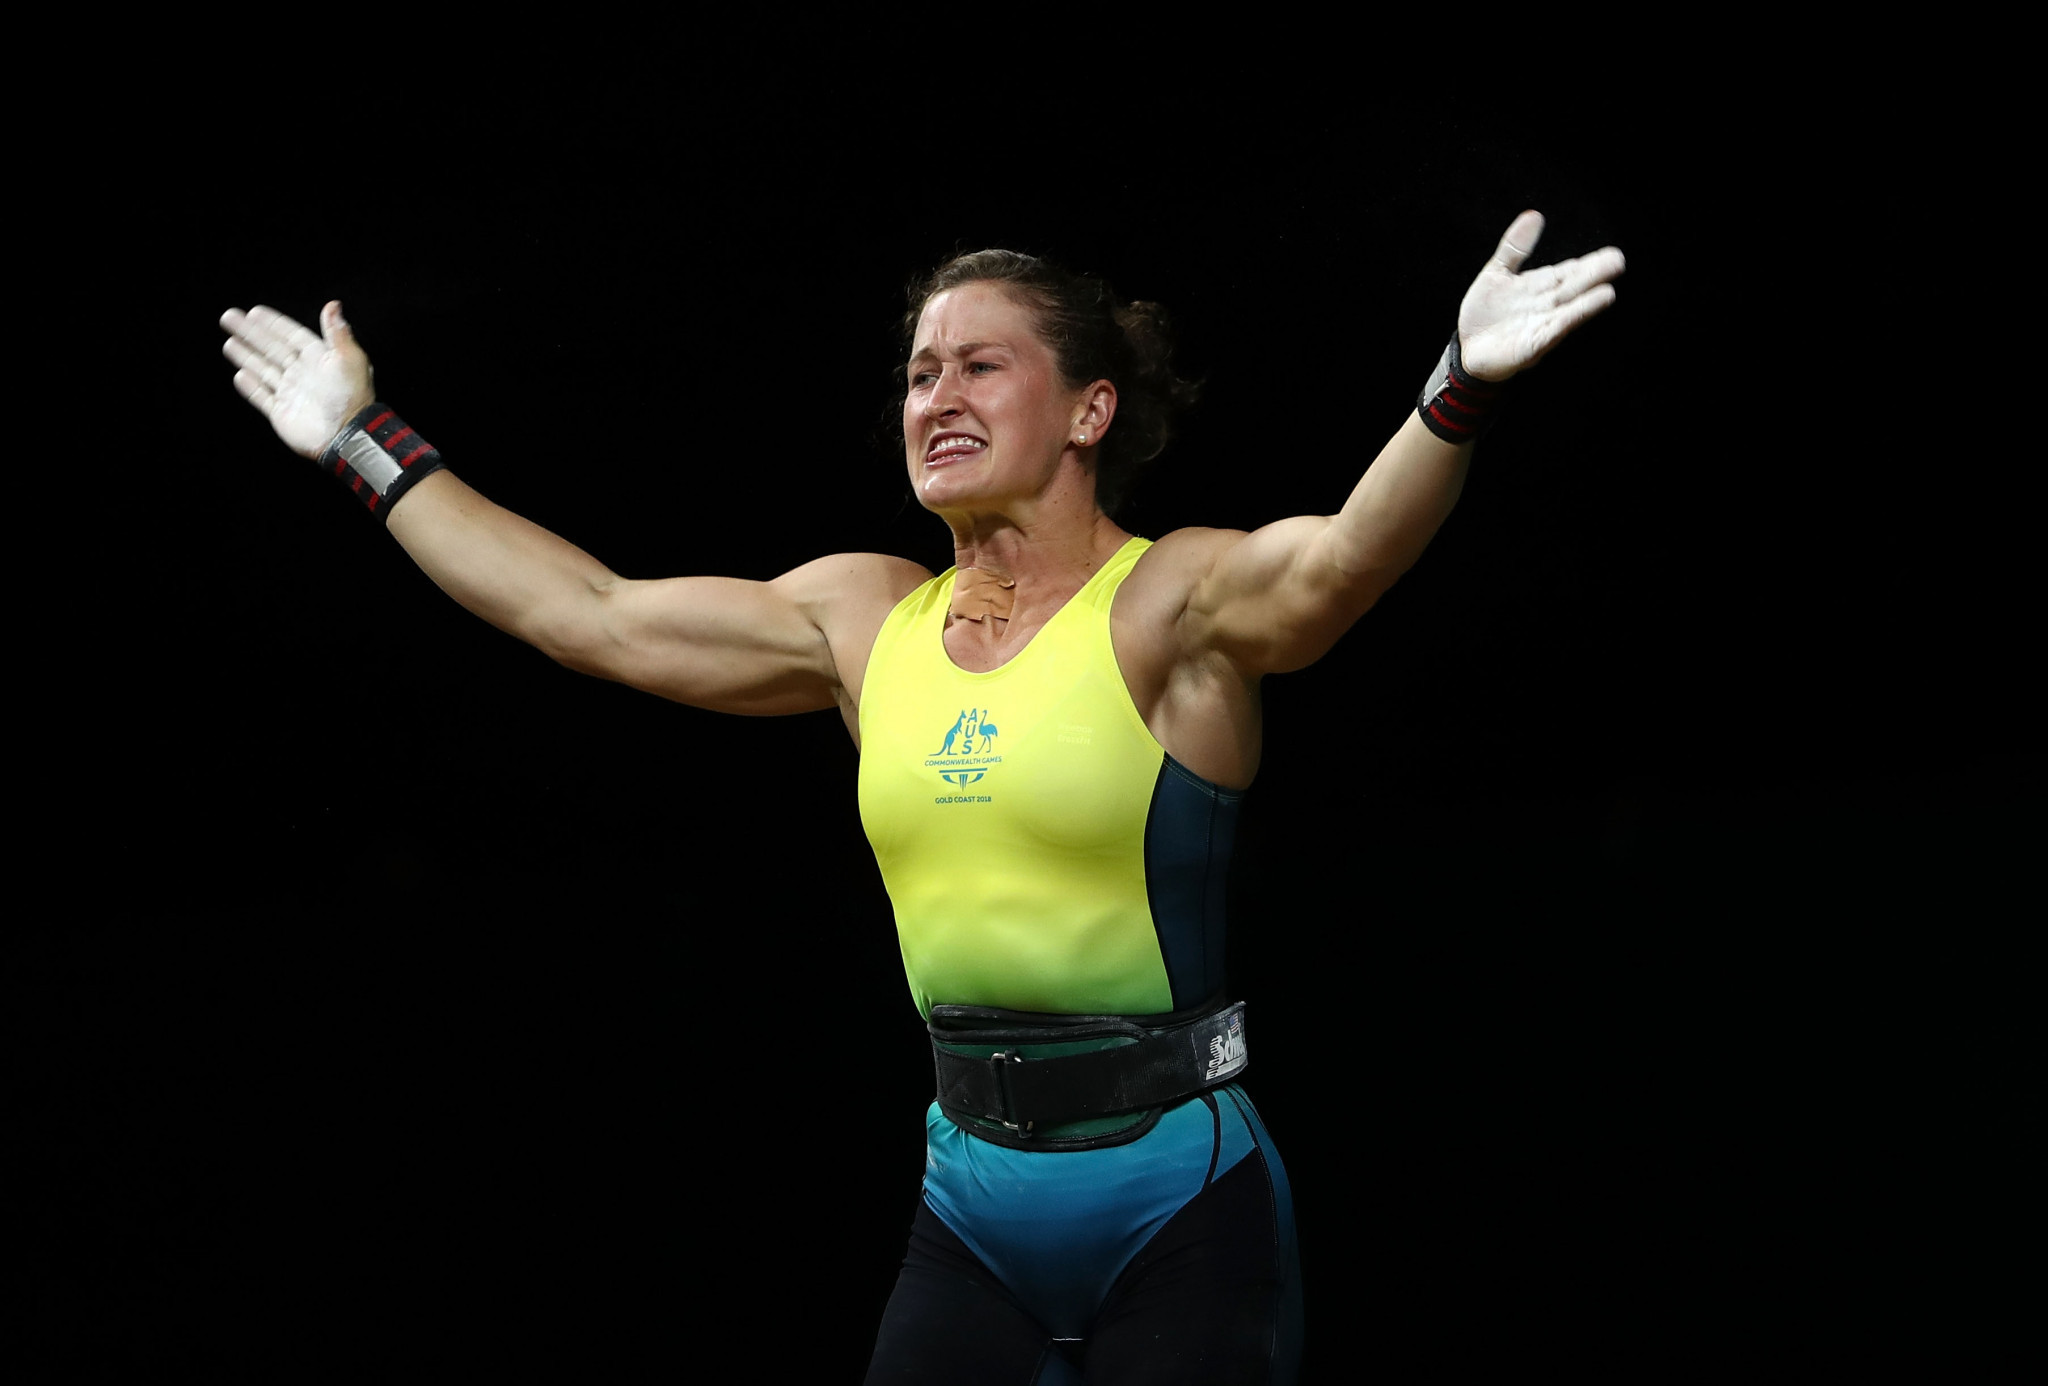 Toomey secures weightlifting gold on home soil at Gold Coast 2018